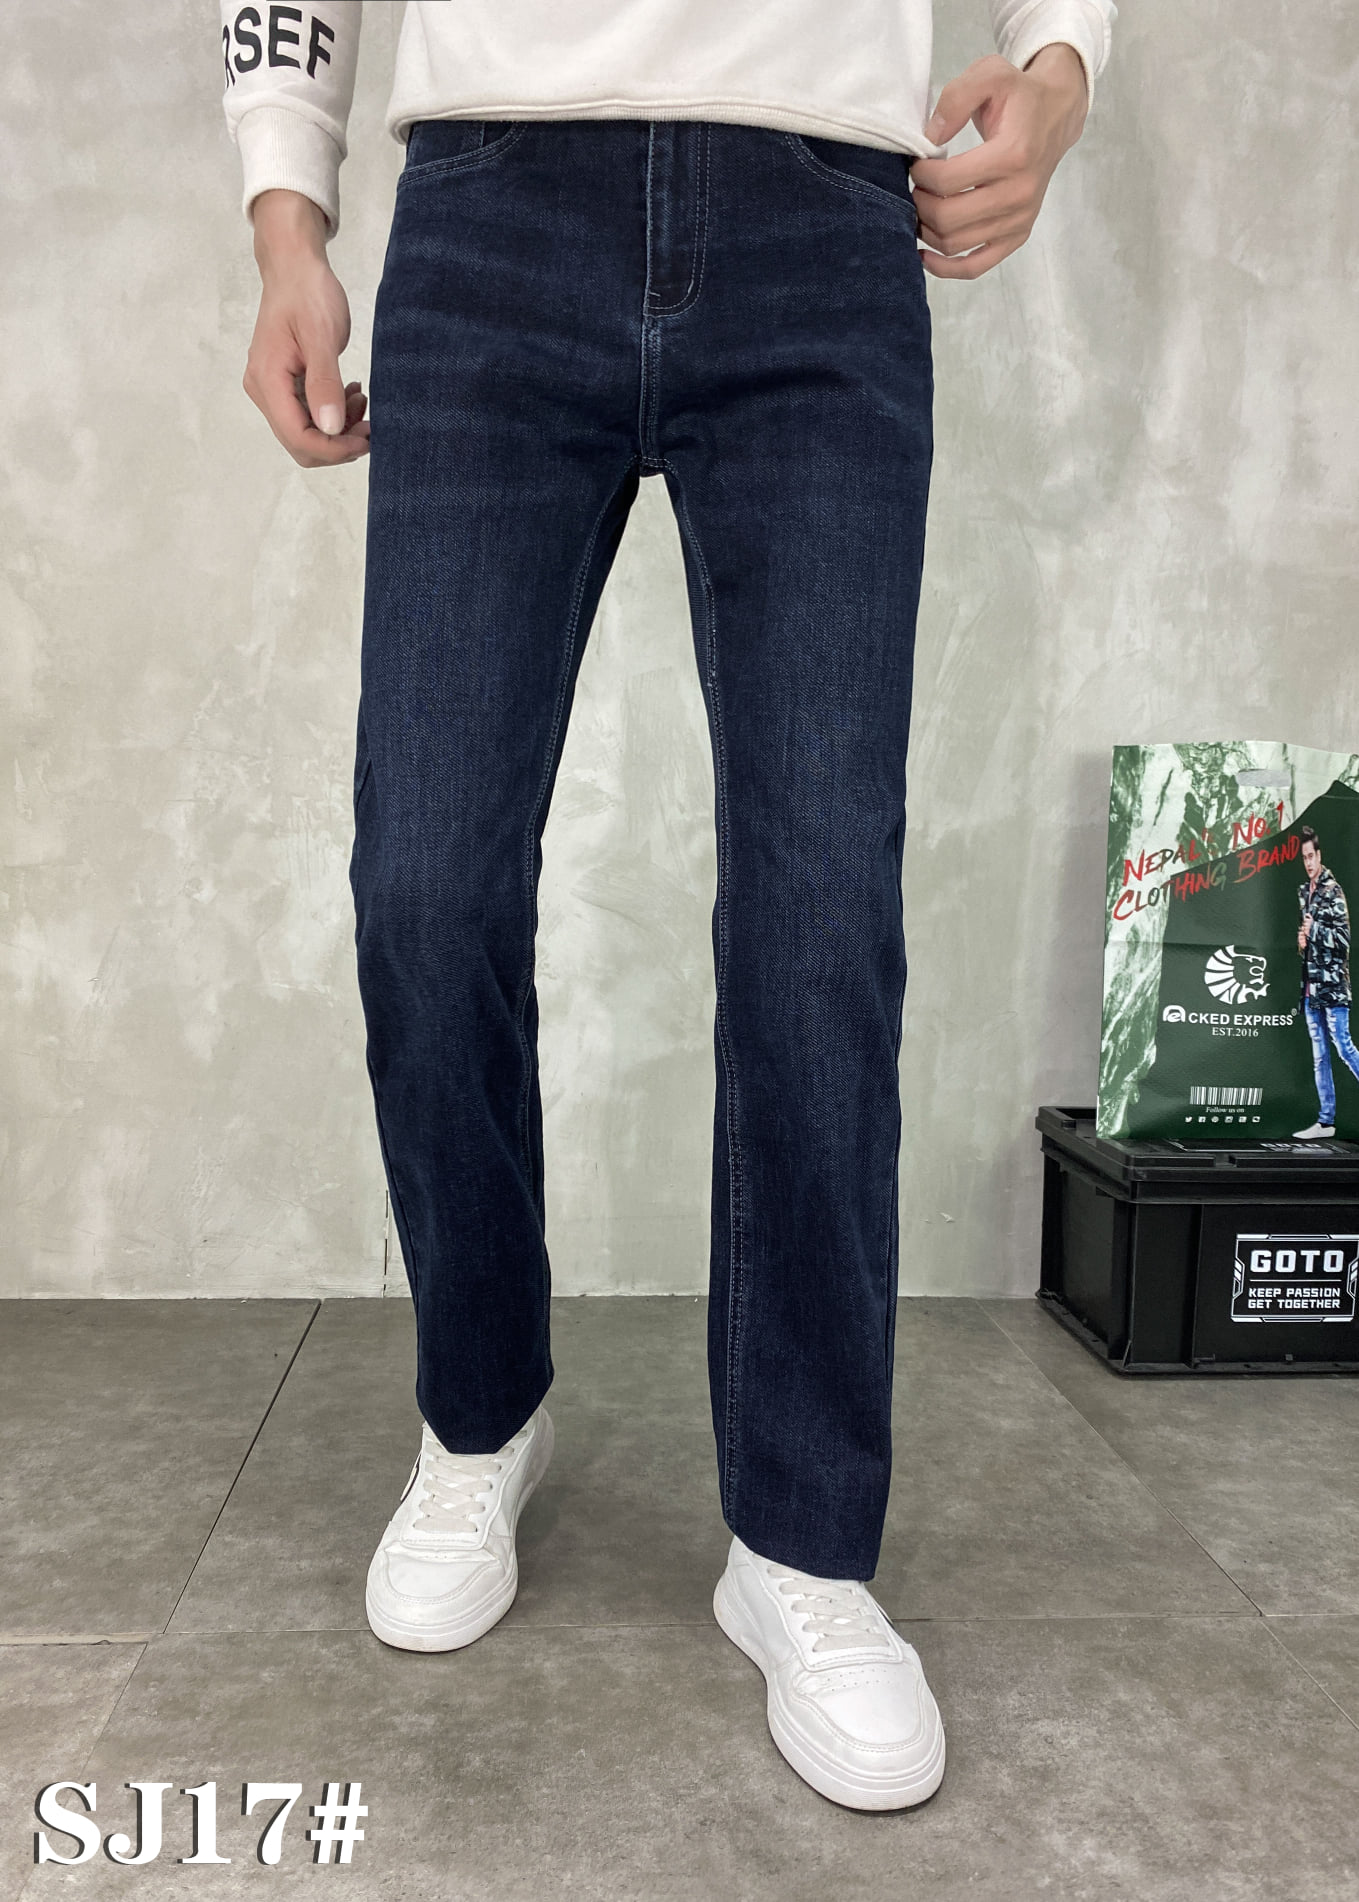 NECKED SOFT JEANS PANT - Necked Express